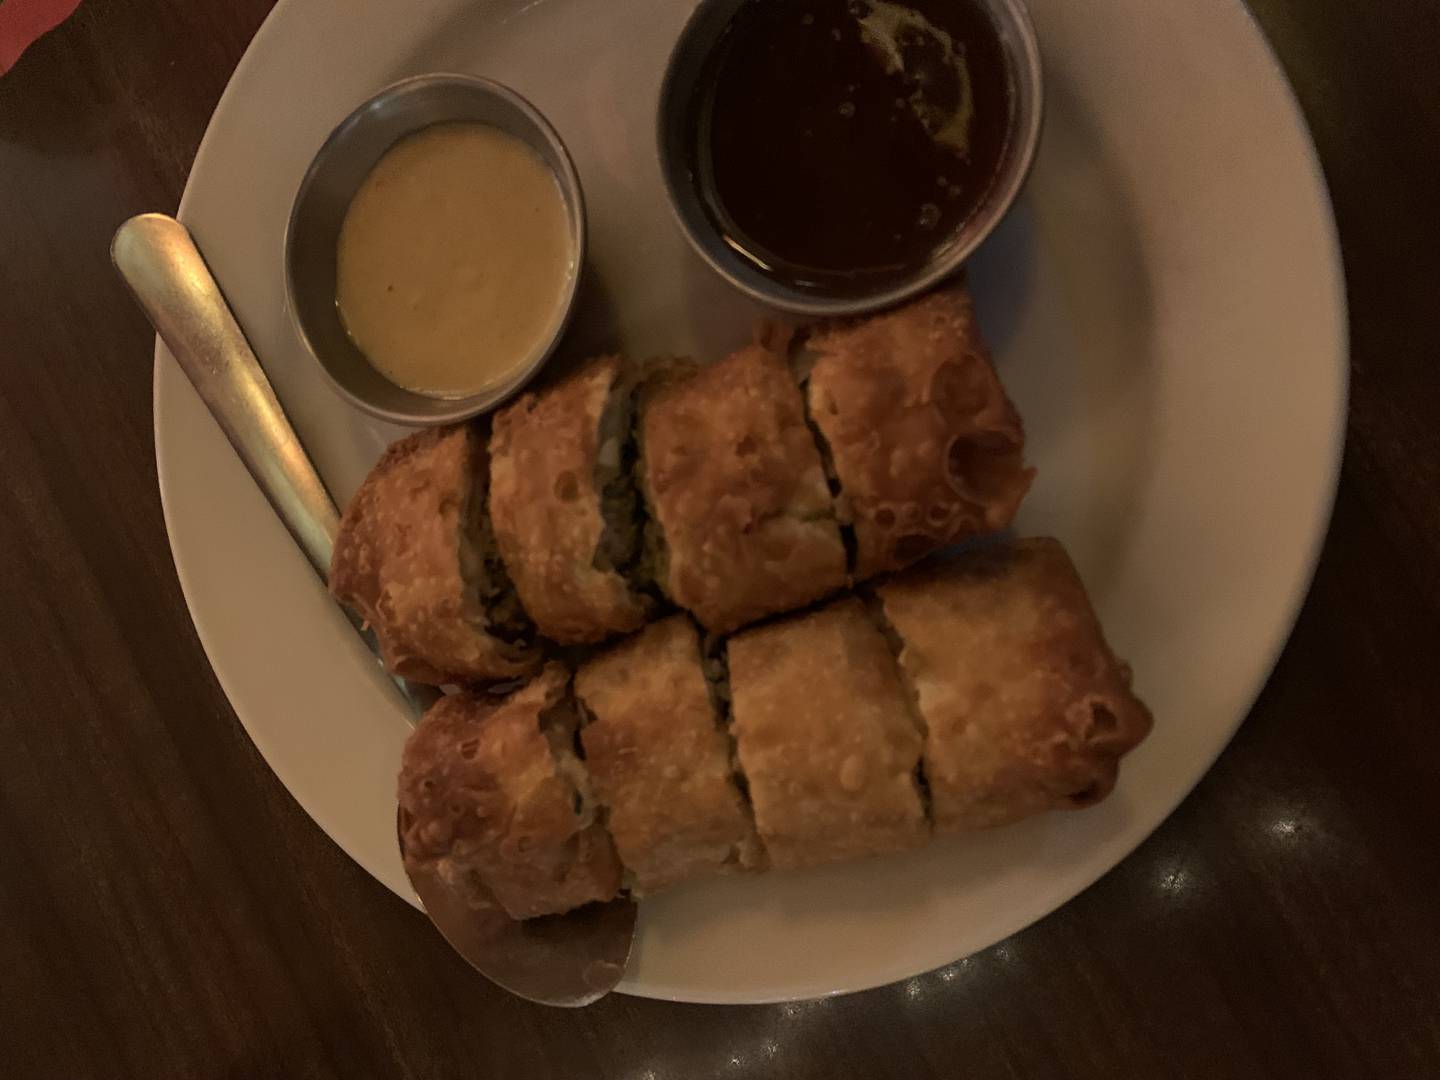 The Breakers egg rolls are hand rolled with a nice blend of chicken, pork and fresh vegetables.